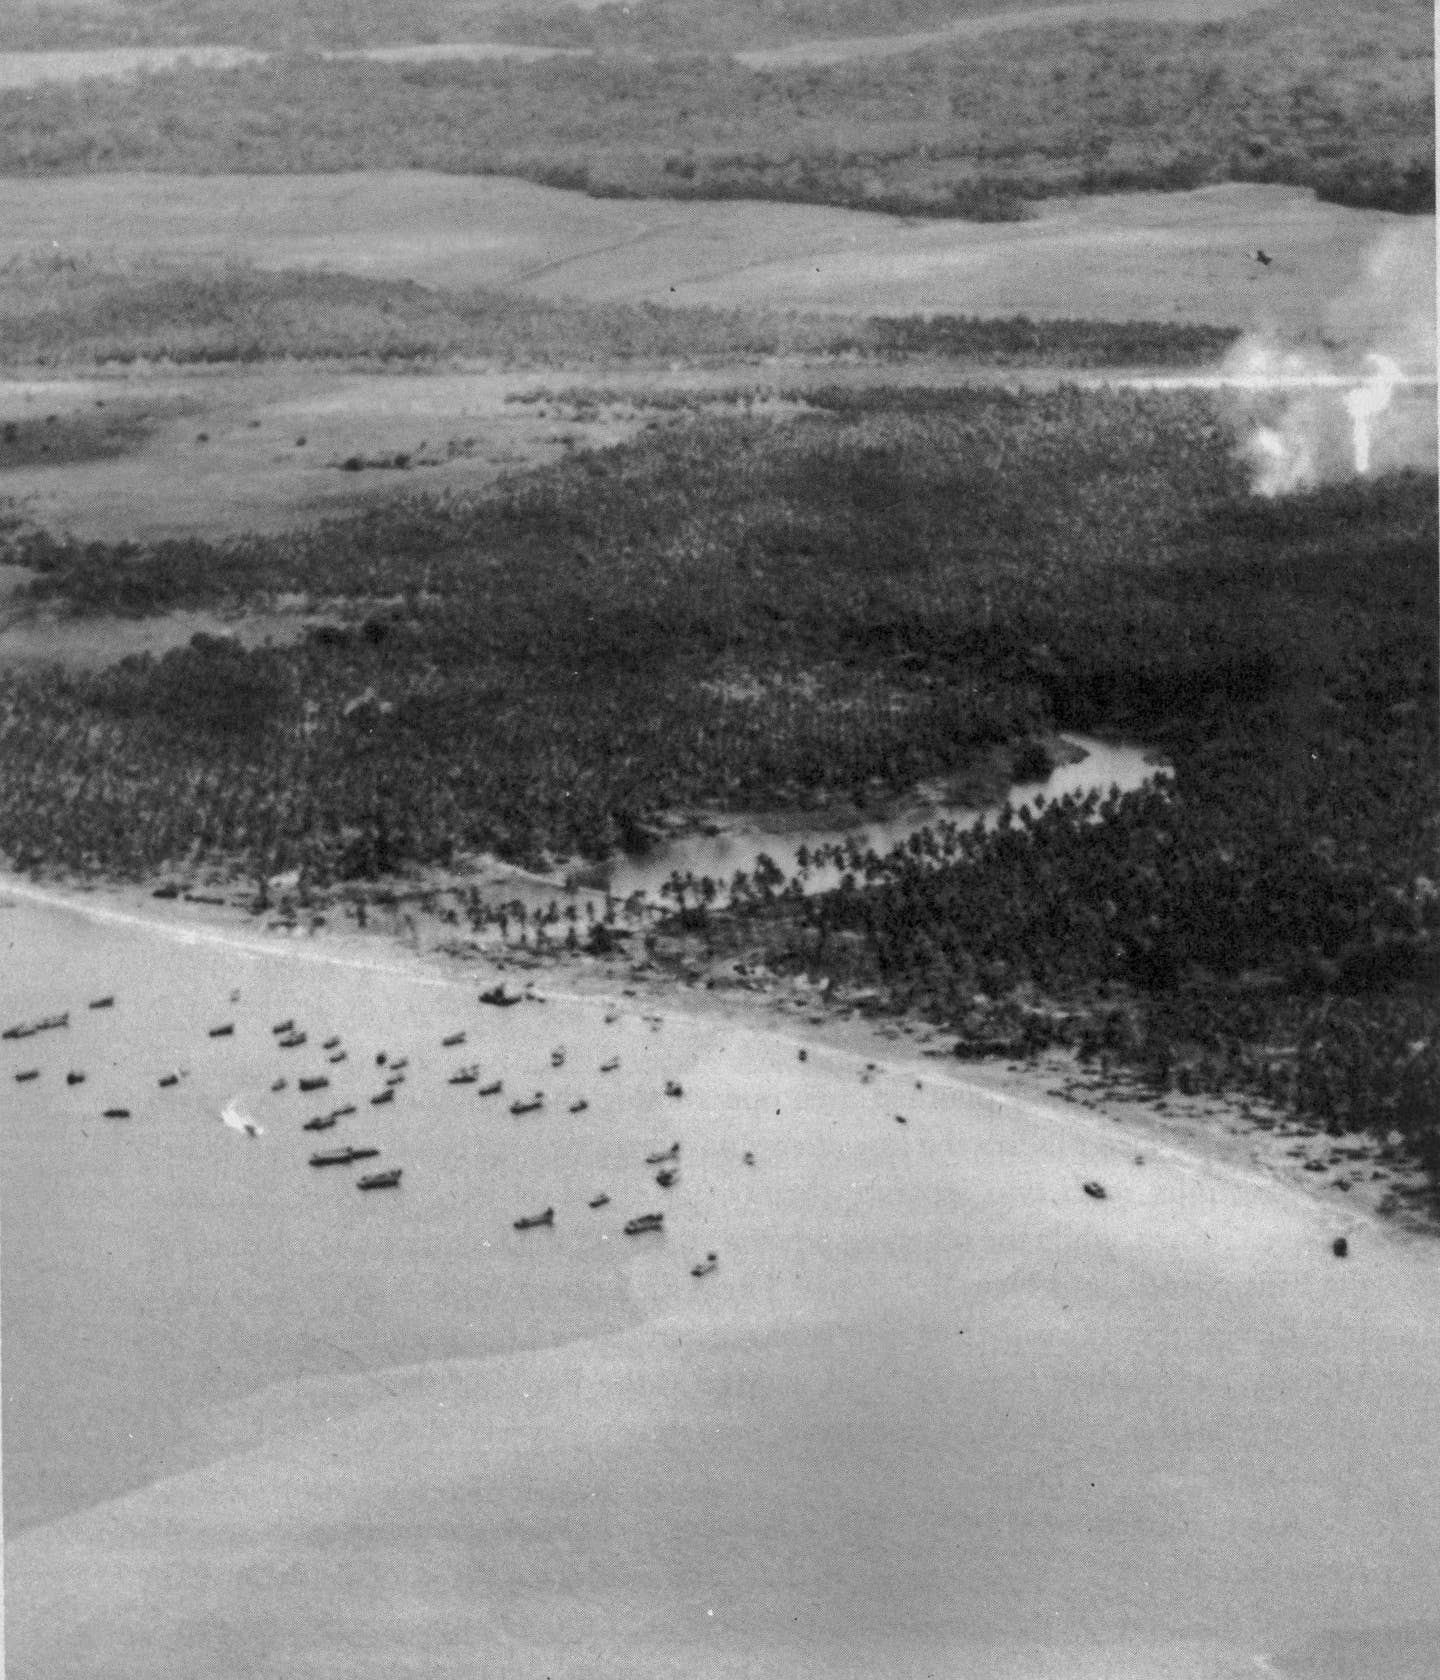 An aerial view of Lunga Point, Guadalcanal, during World War II showing the airfield captured by the U.S. Marines early in the campaign.